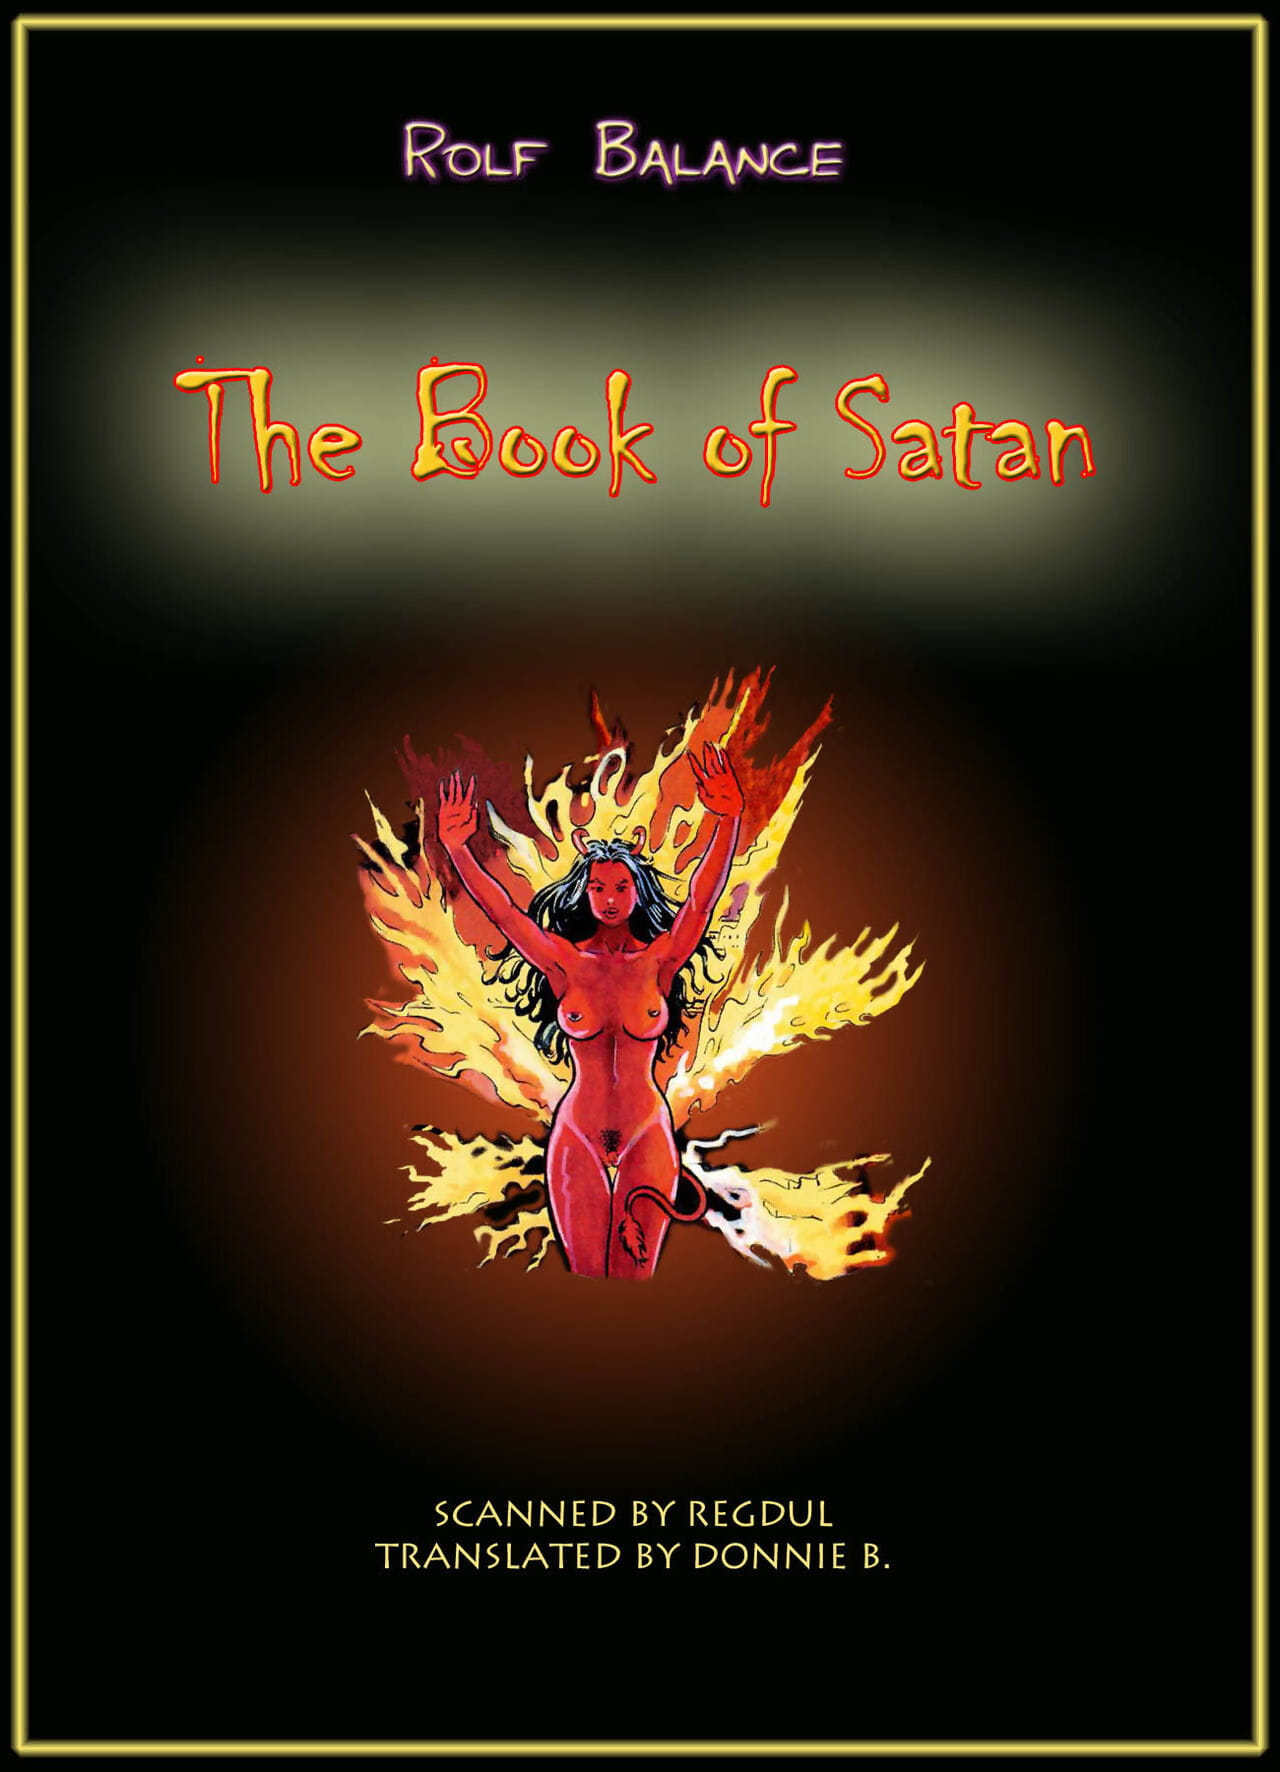 The Book of Satan page 1